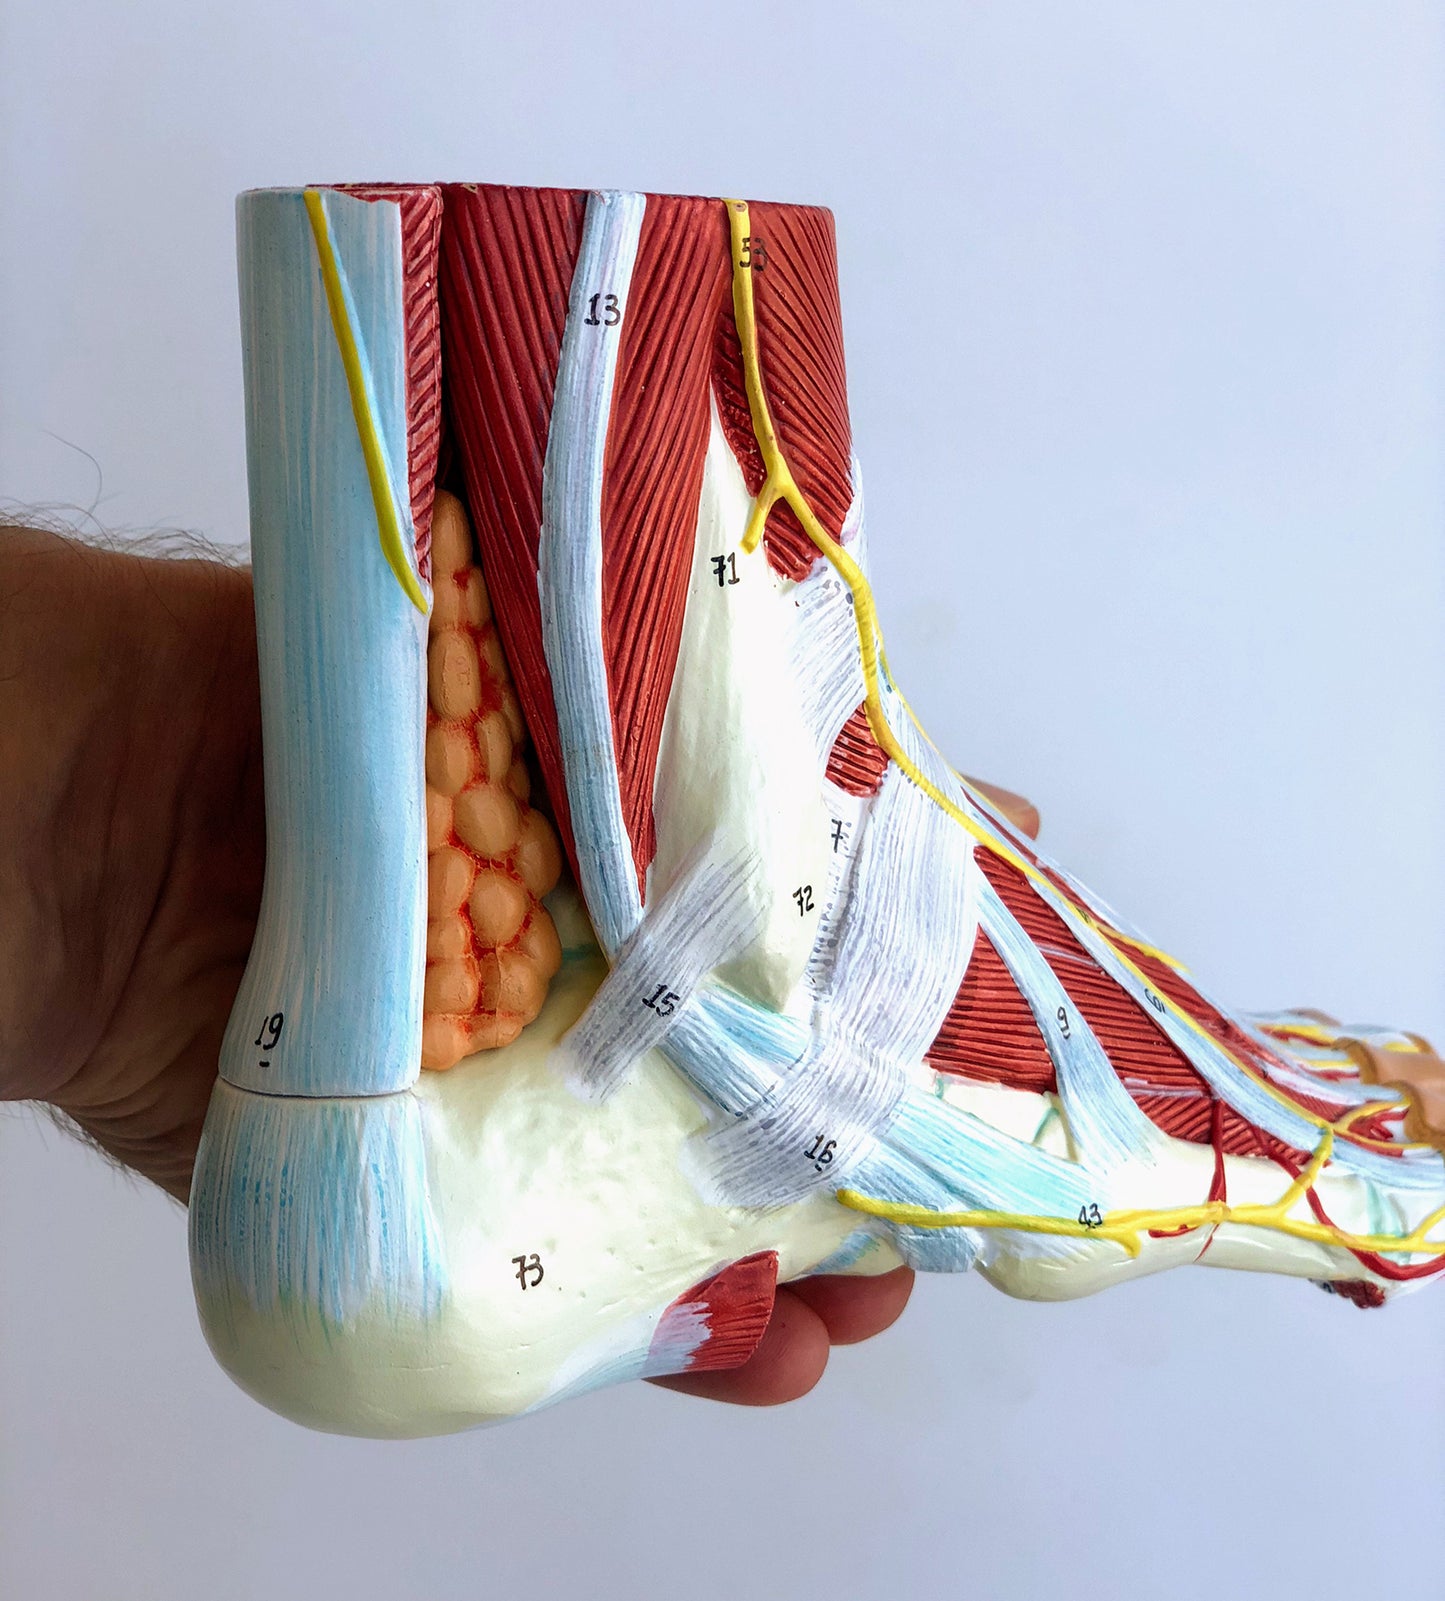 Complete foot model with ligaments, muscles, vessels and nerves - can be separated into 9 parts